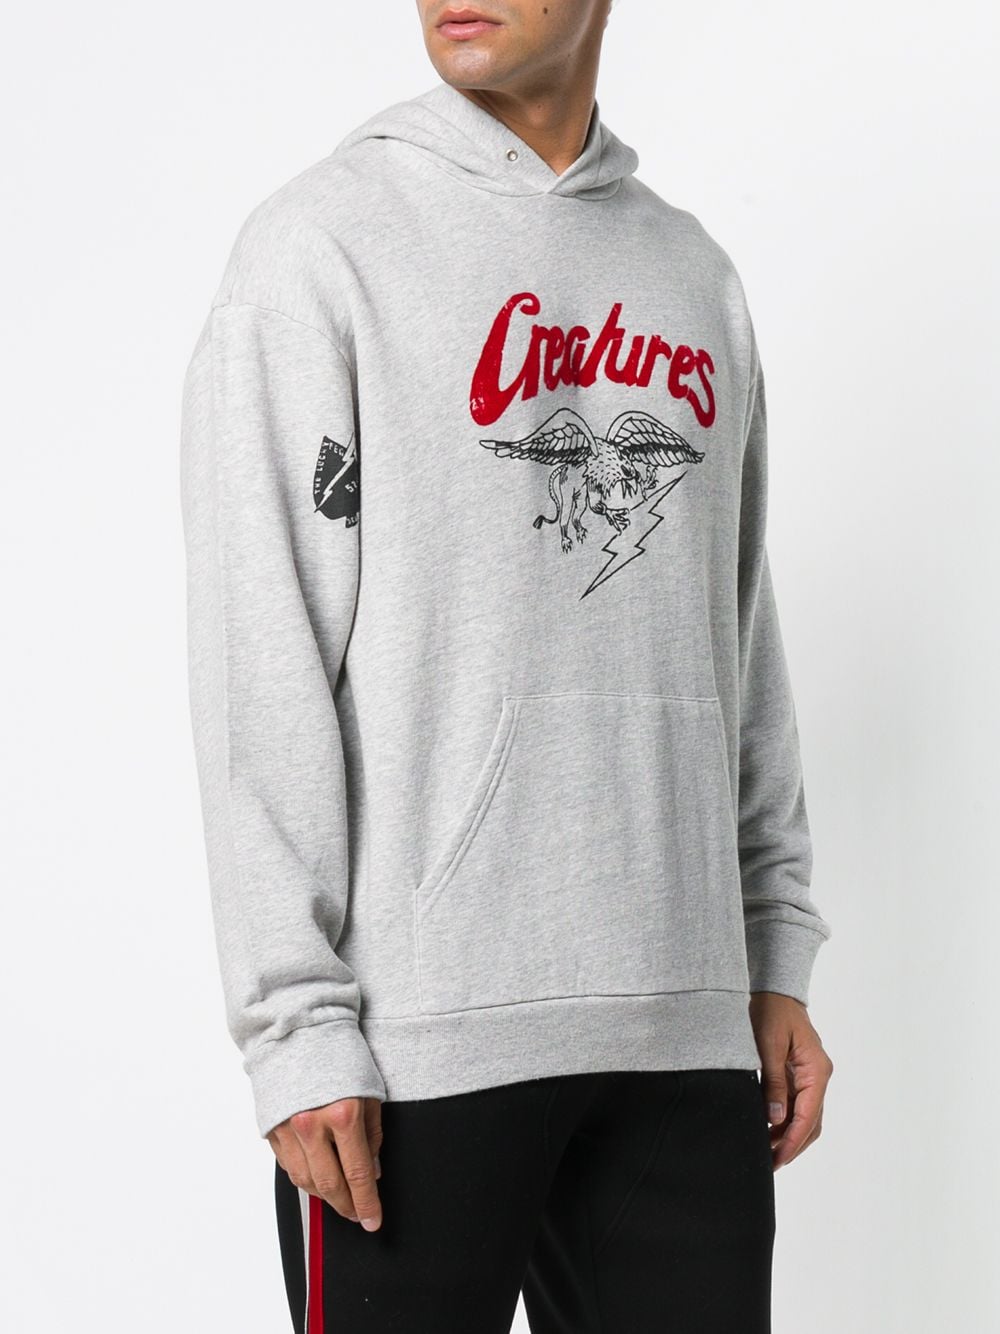 Givenchy Creatures Hoodie - Farfetch